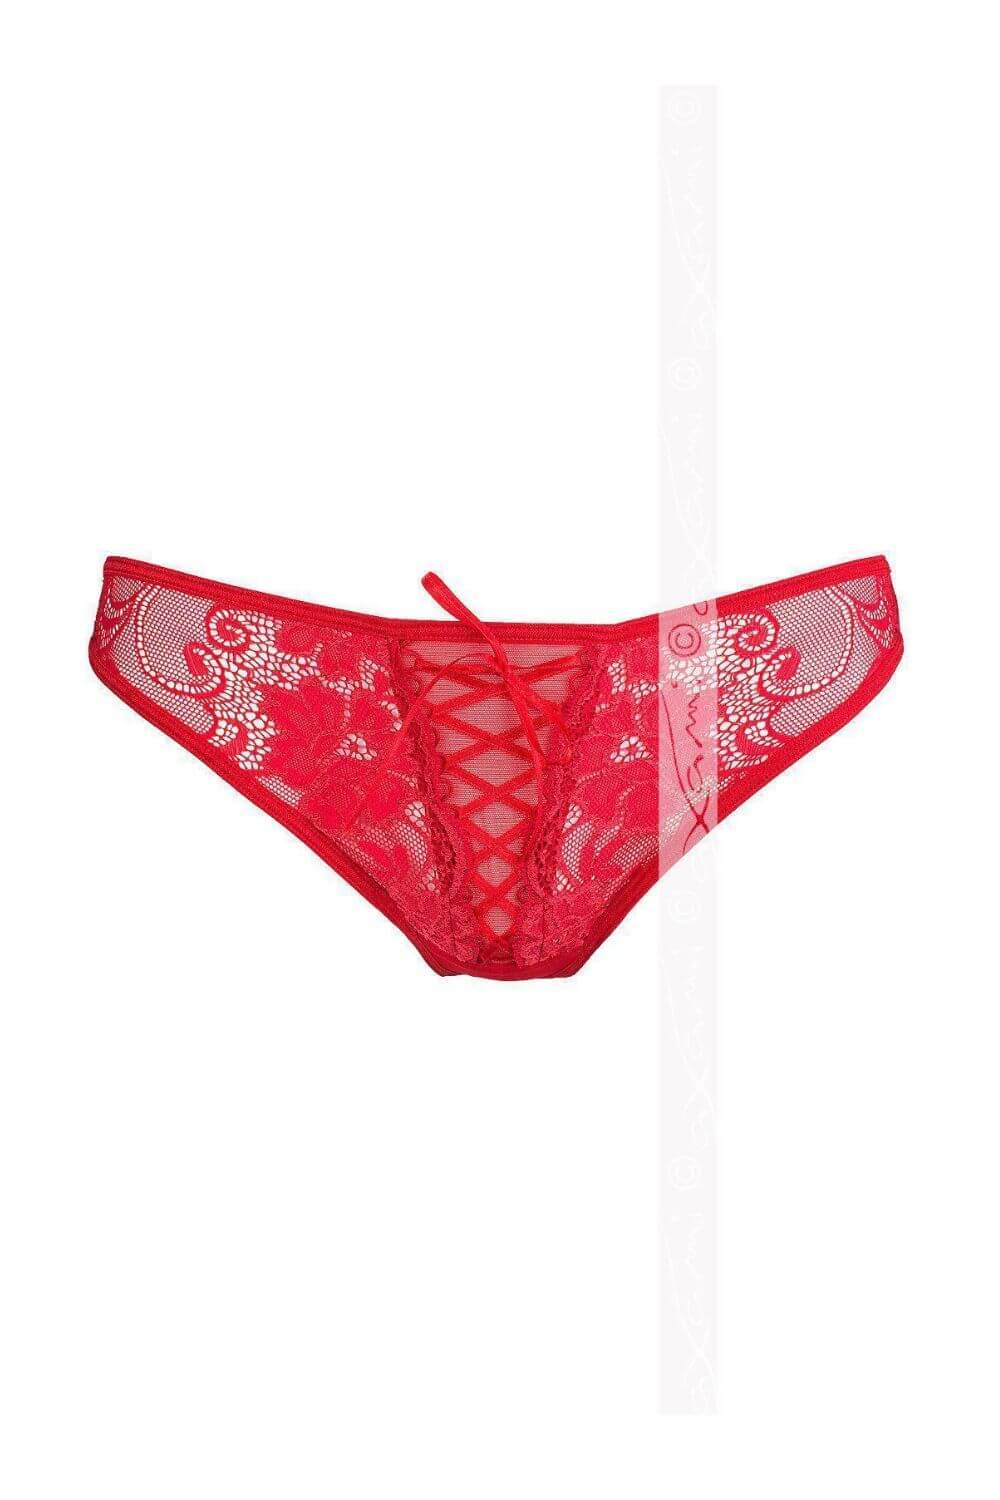 Cassiopea Lace-up G-String-Axami-Rebel Romance